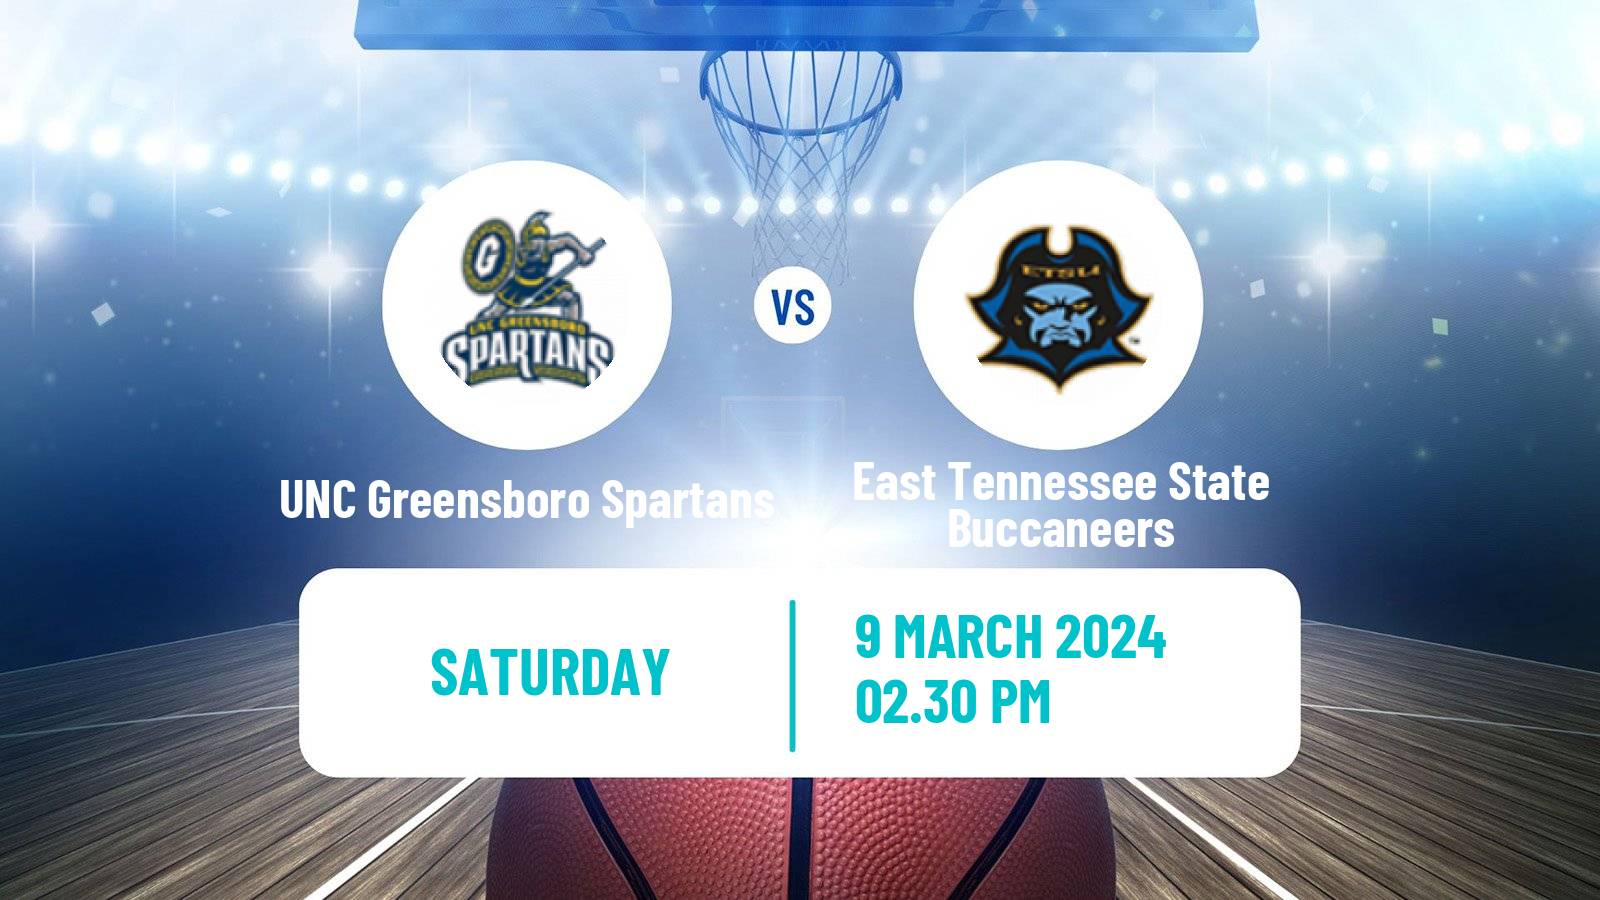 Basketball NCAA College Basketball UNC Greensboro Spartans - East Tennessee State Buccaneers